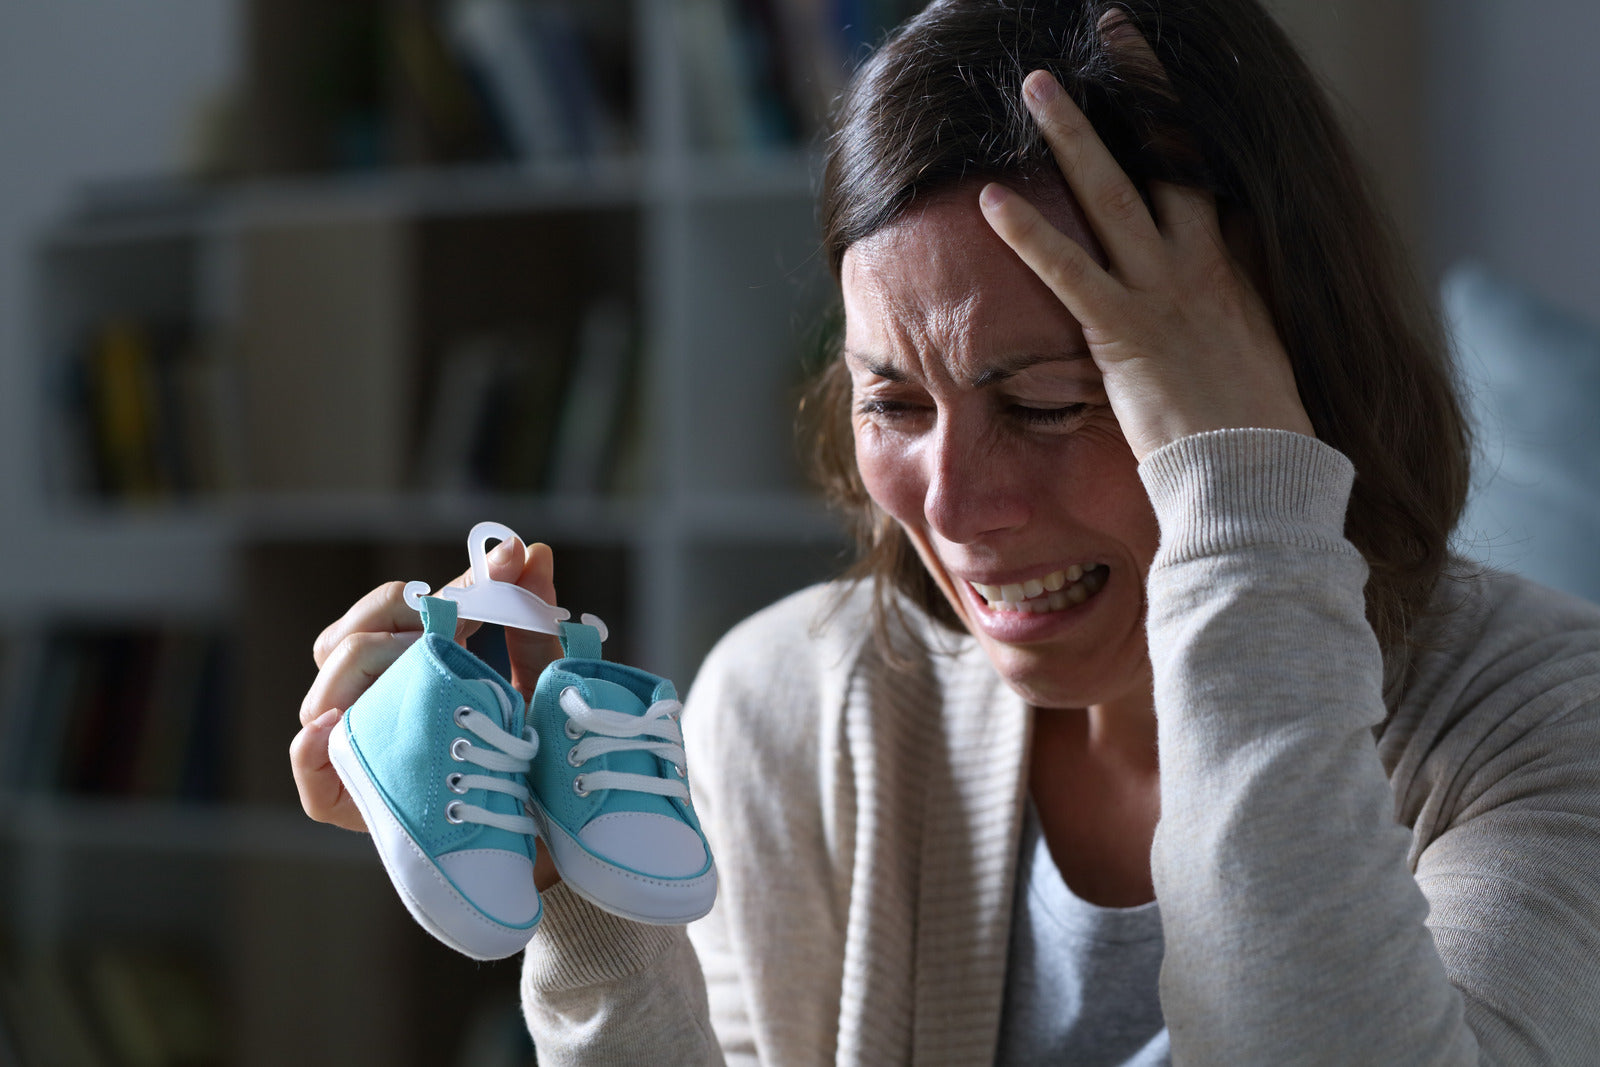 Woman crying and feeling sadness over her miscarriage while holding up a pair of blue baby booties